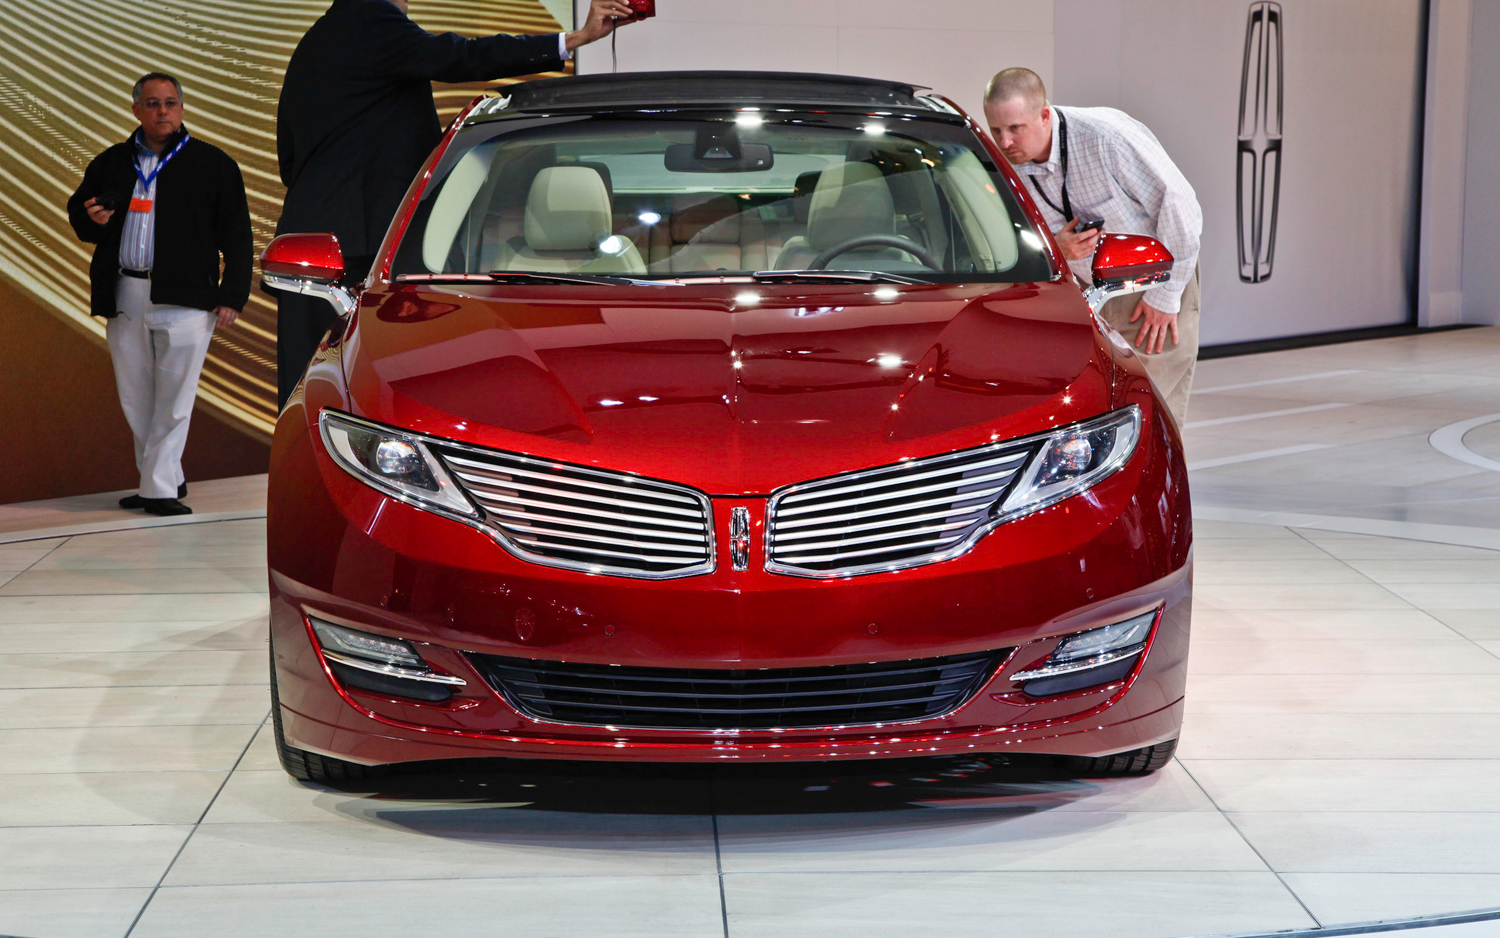 2013 Lincoln MKZ | New cars reviews